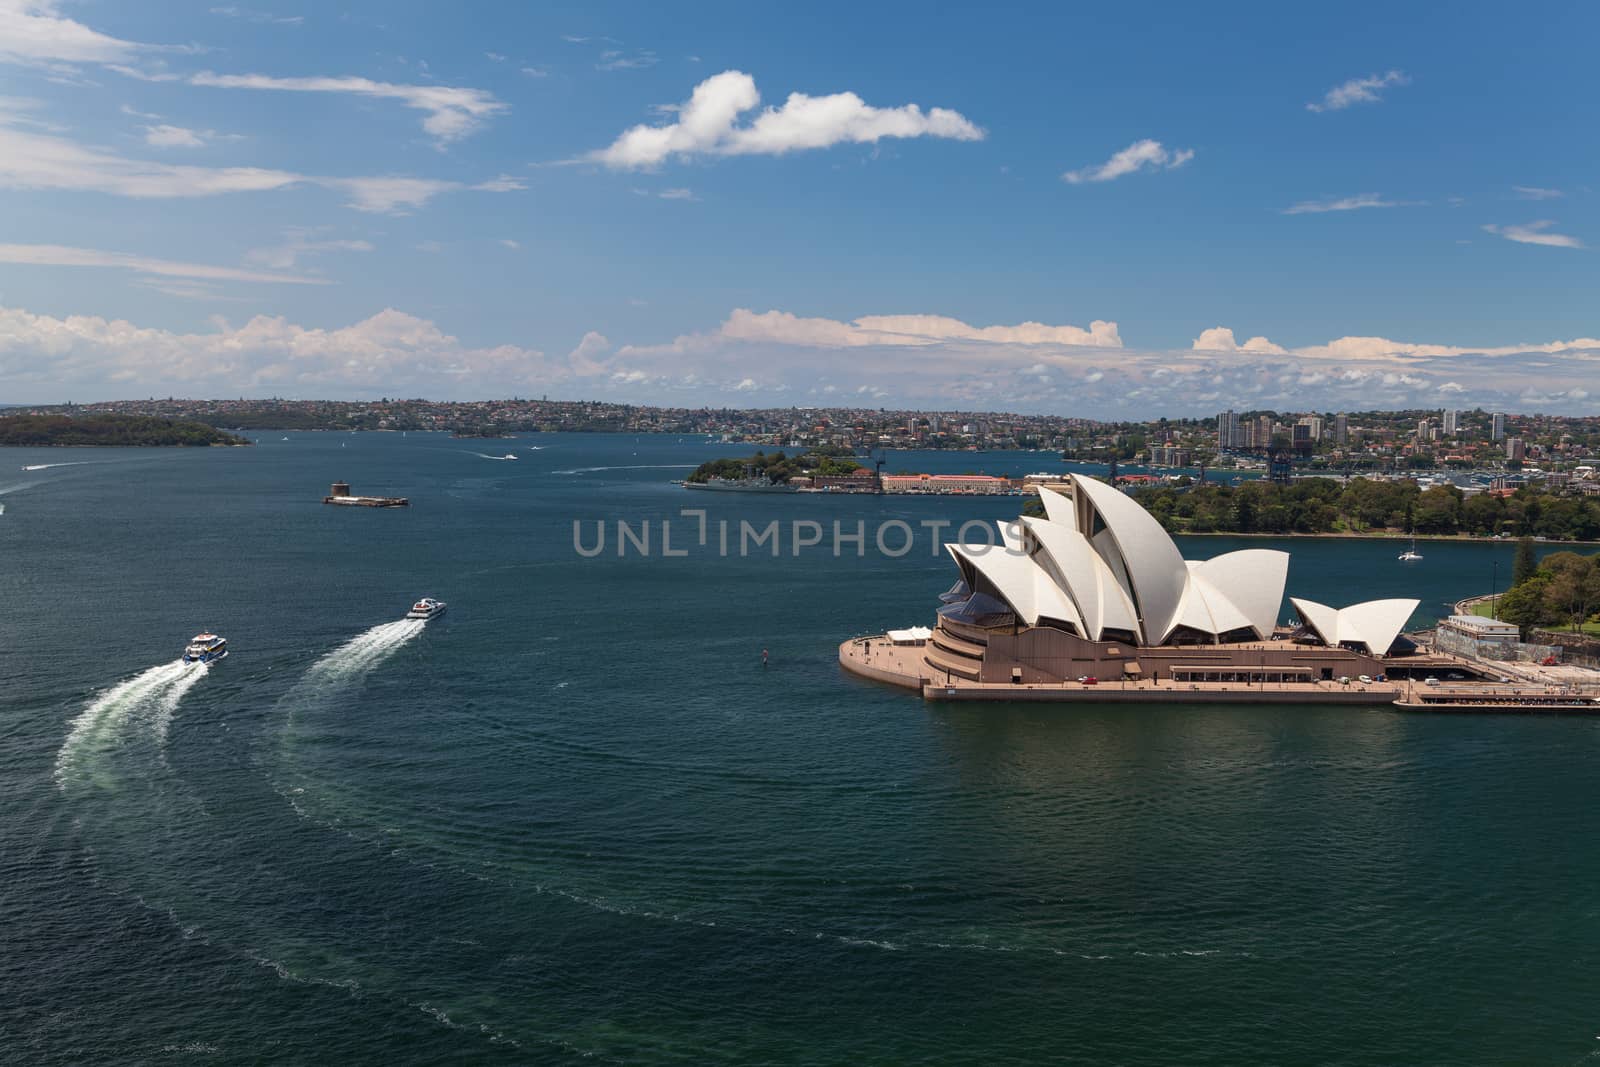 Sydney Harbour, Australia View stretching to the far distance from high angle by kgboxford